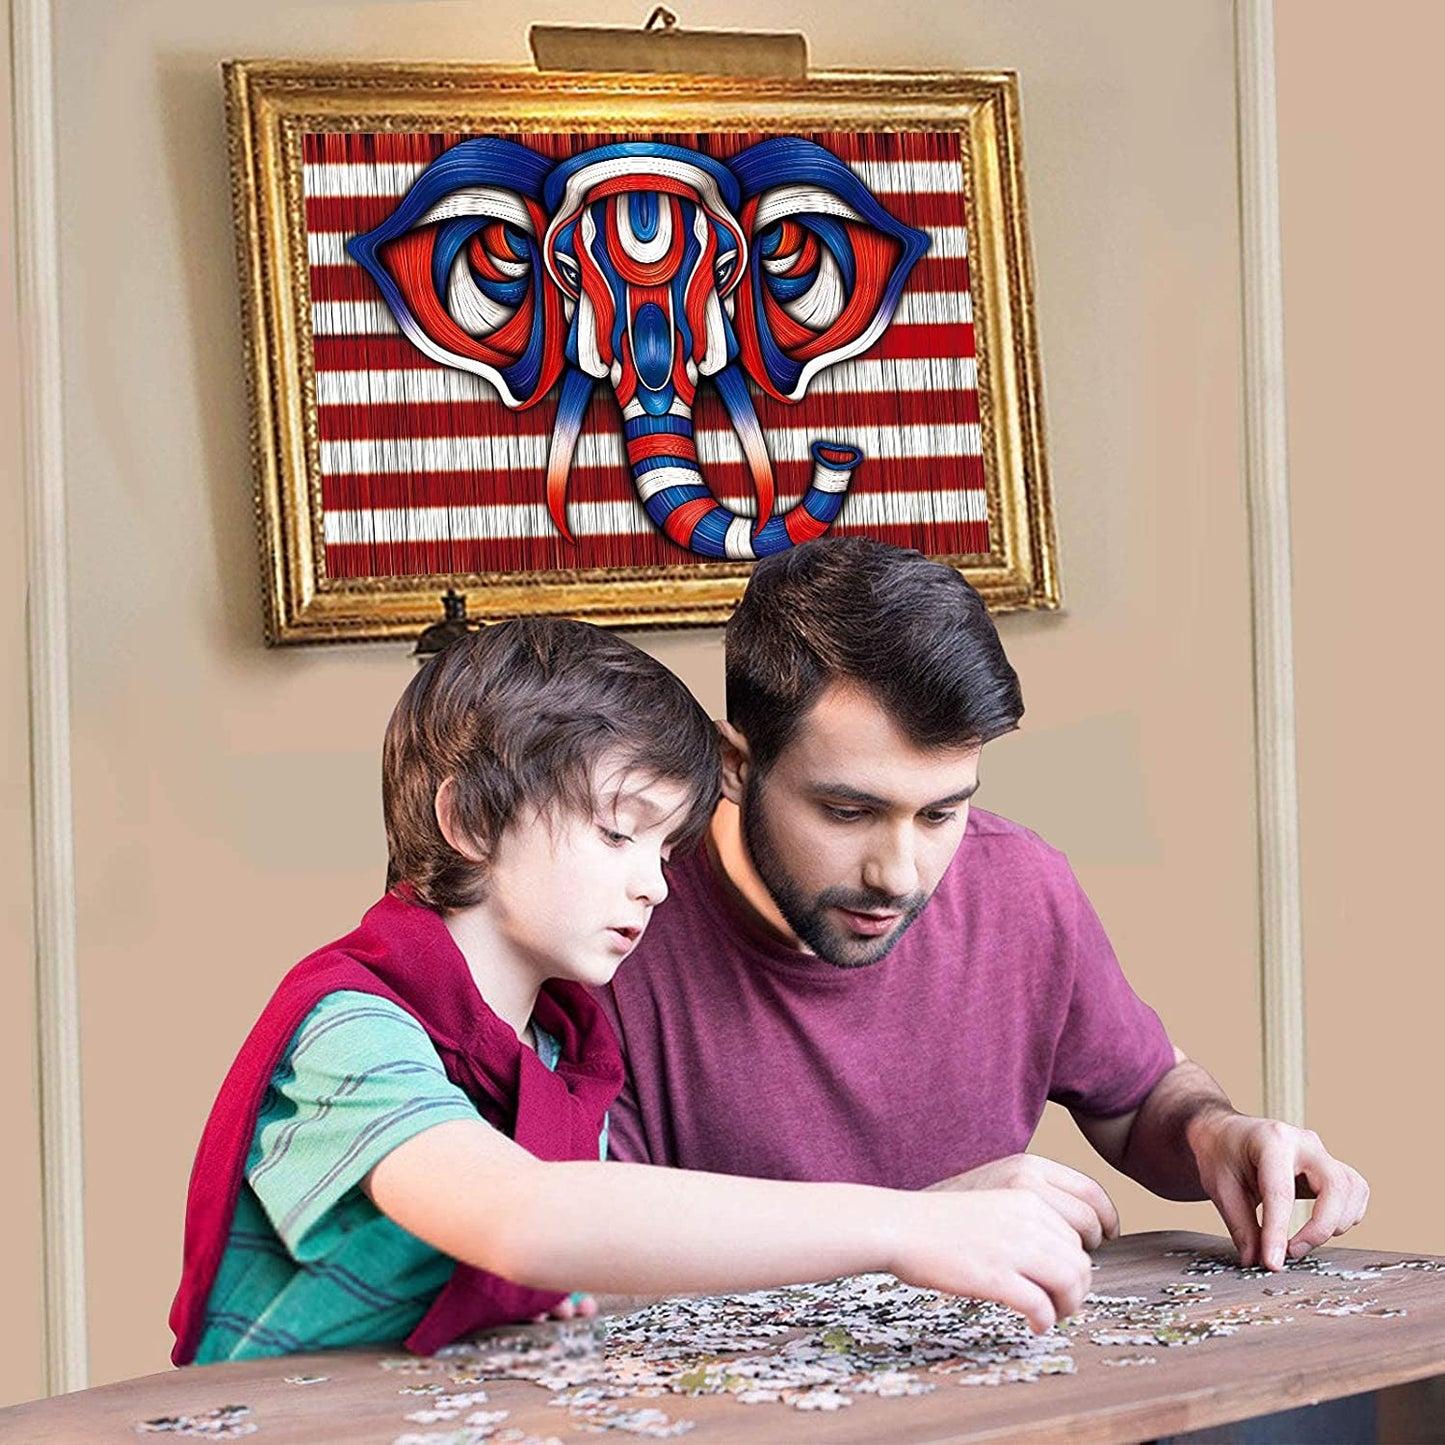 Puzzles for Adults 1000 Piece, Jigsaw Puzzles 1000 Pieces for Adults Kids, Puzzle 1000 Pieces - Educational Toys & Challenging Family Activity Fun Games